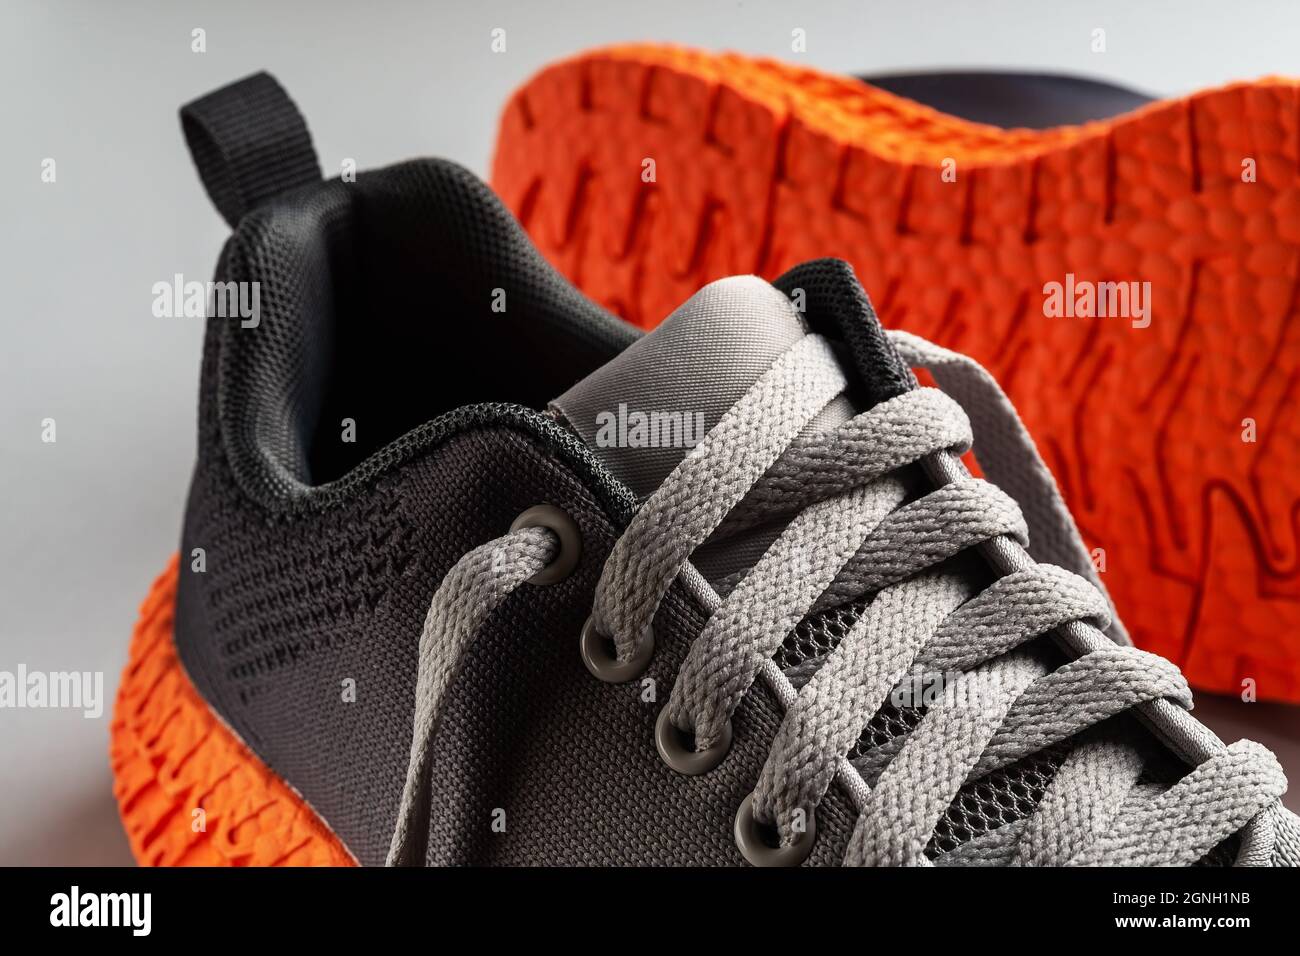 Elastic laces of gray mesh fabric sneakers with orange grooved sole ...